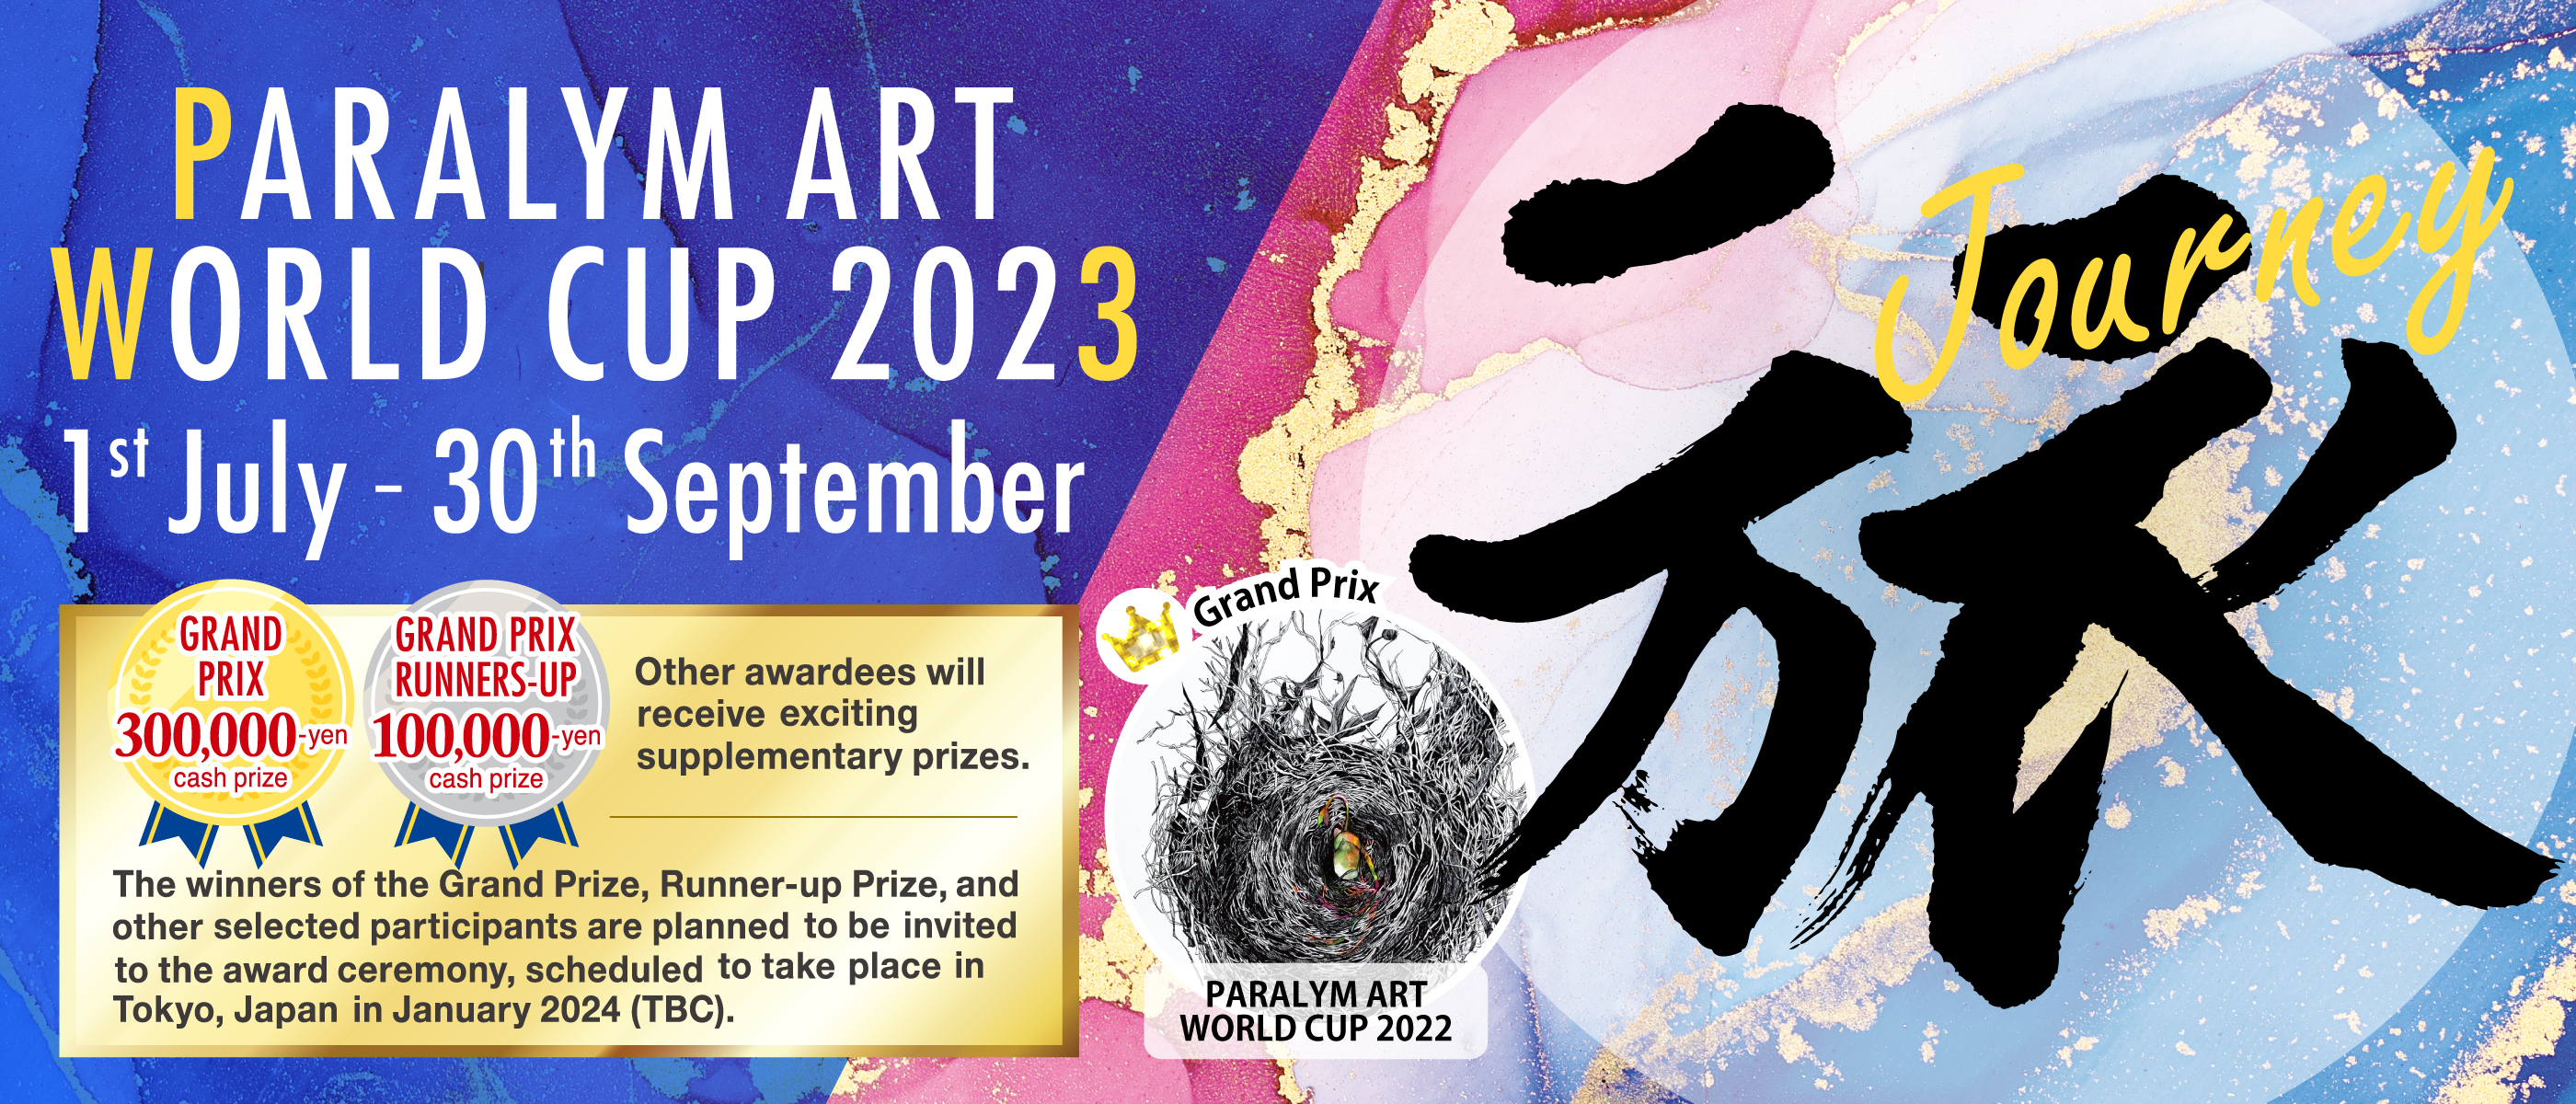 PARALYM ART WORLD CUP 2023